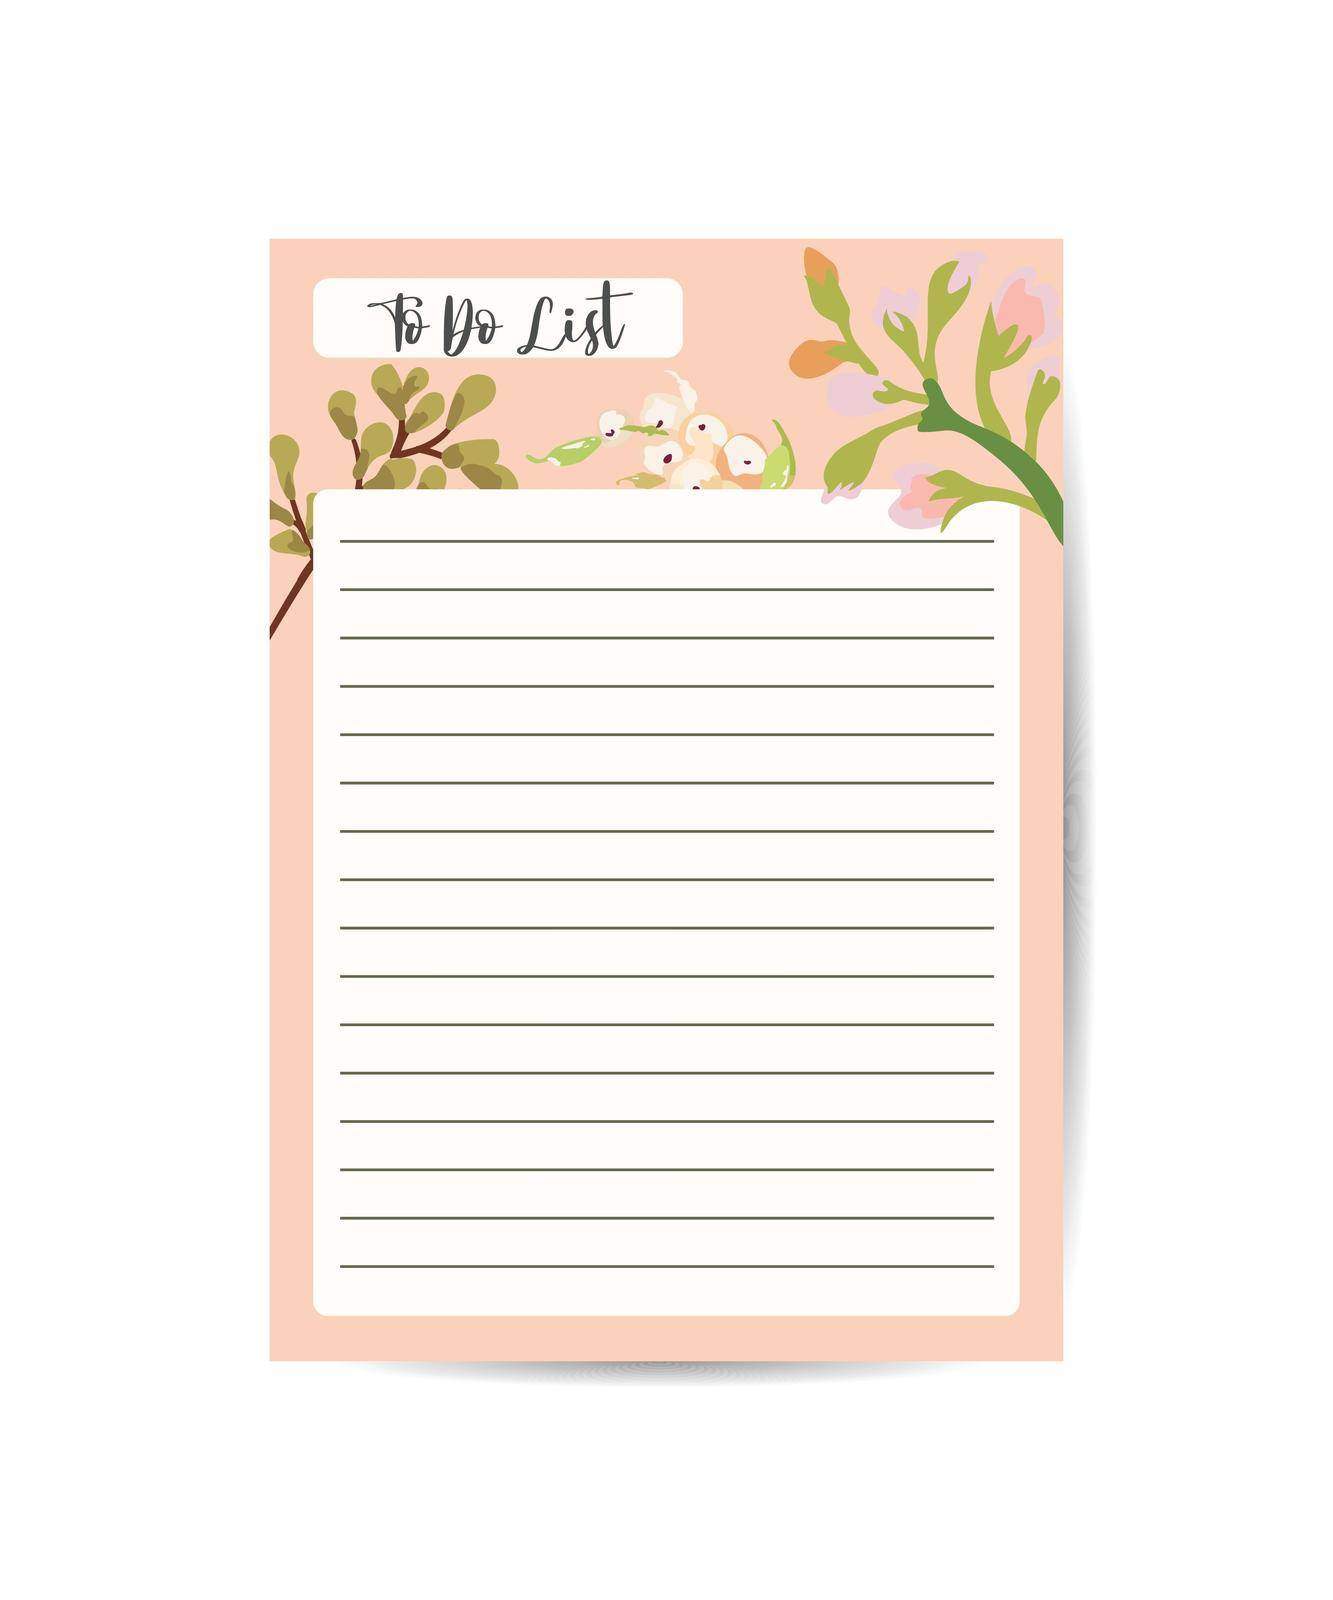 To do planner template Daily check list leaves and floral elements in fall colors.Perfect template for organizer and schedule with notes. by ANITA